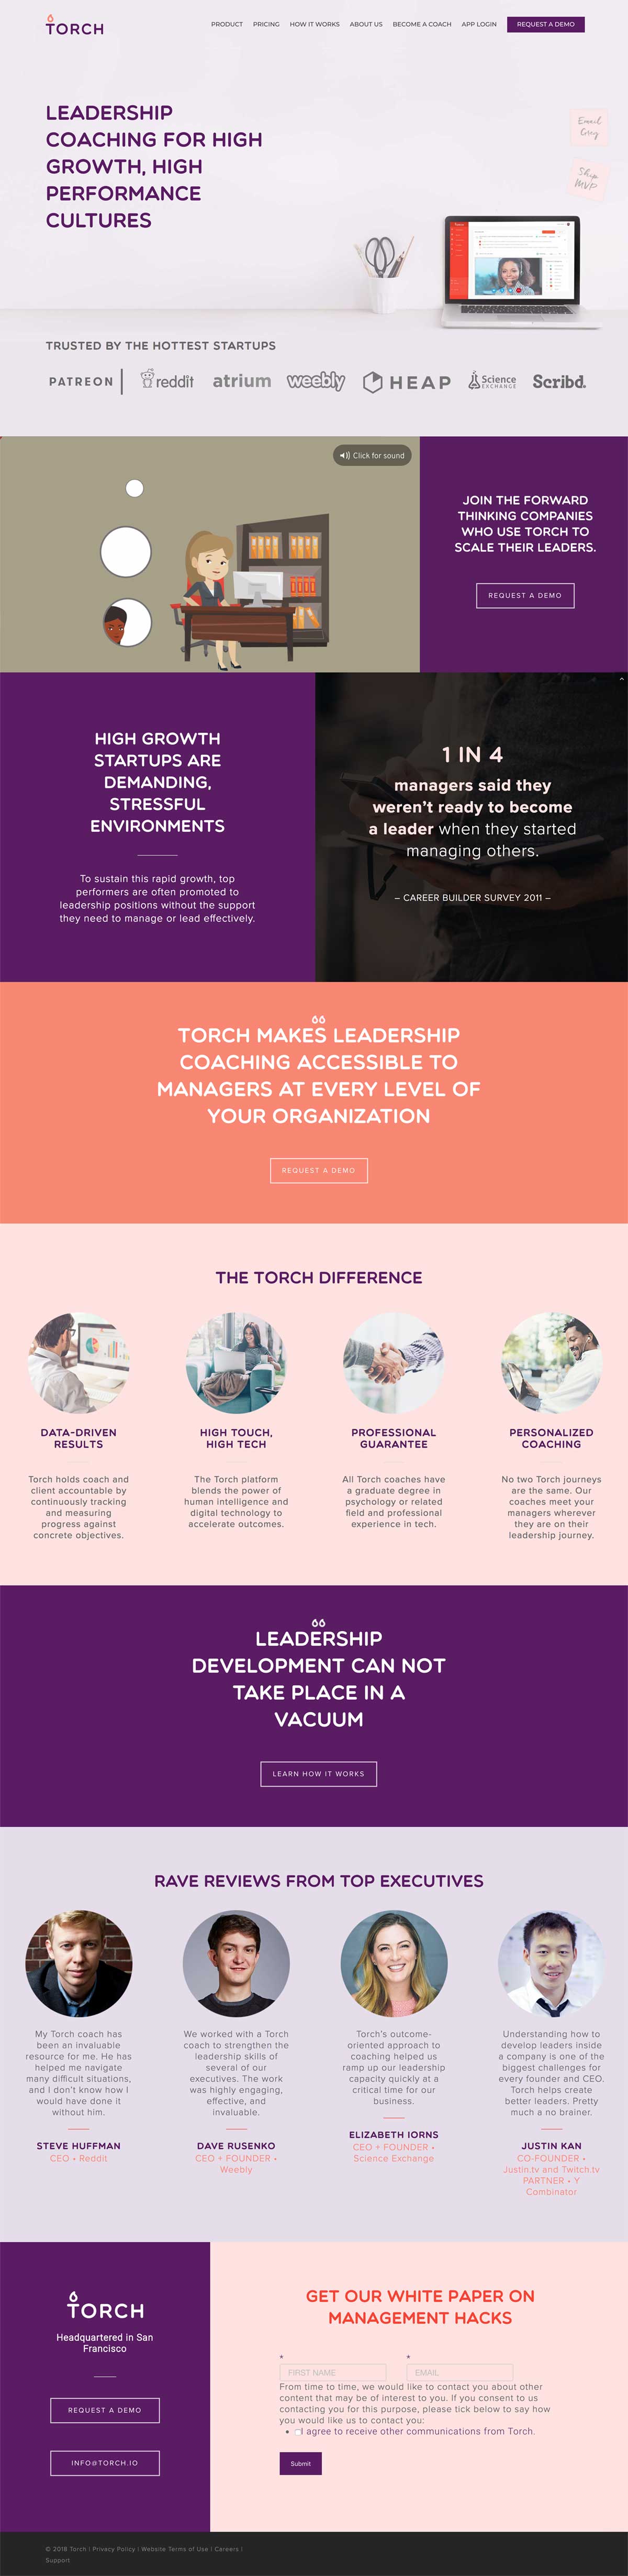 We provided web design and marketing services to Torch - a Silicon Valley tech startup